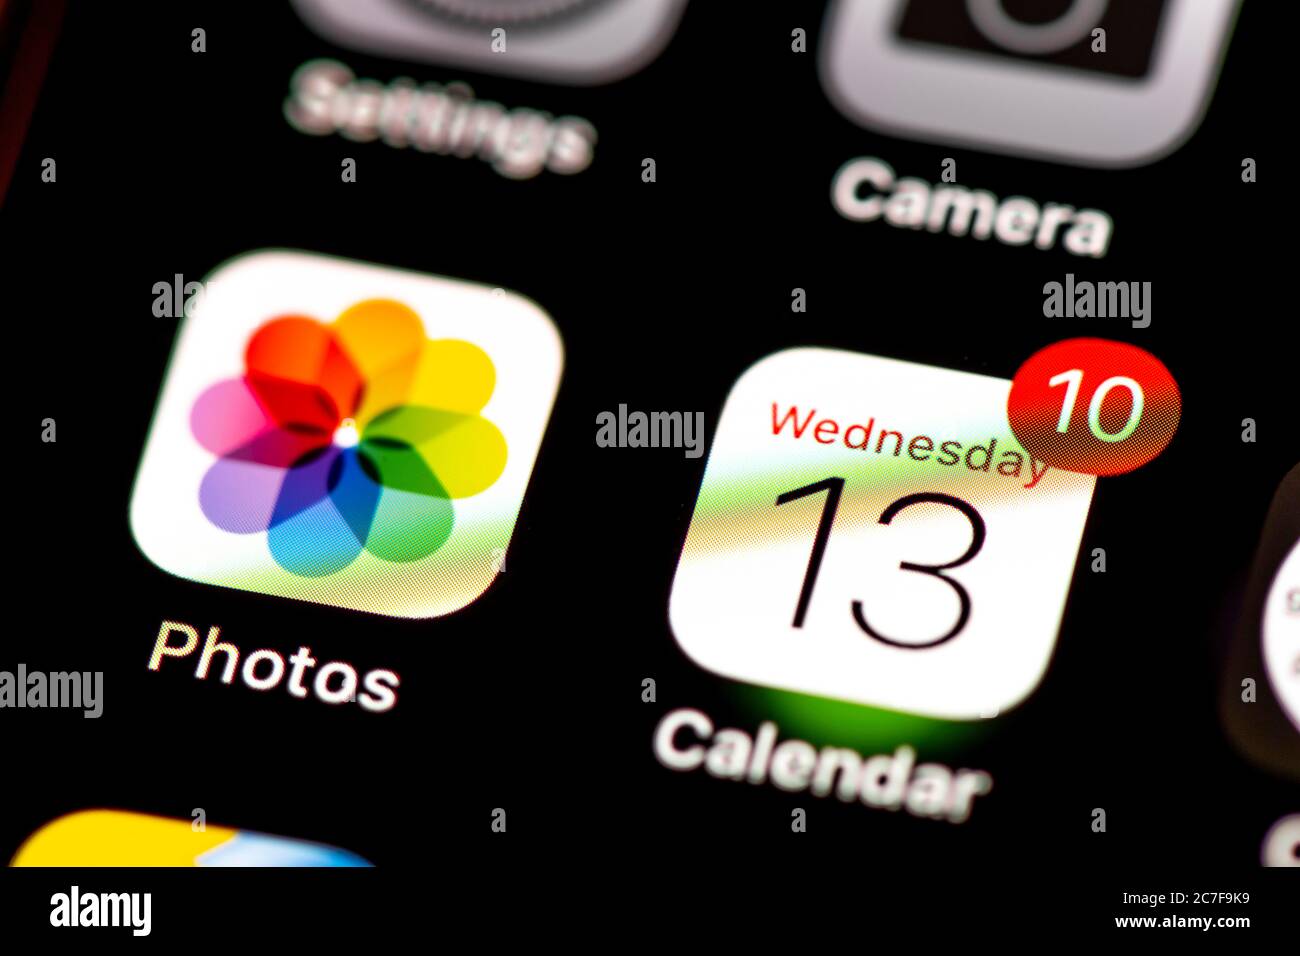 Photos Icon, App Icons on a mobile phone display, iPhone, Smartphone, close-up Stock Photo